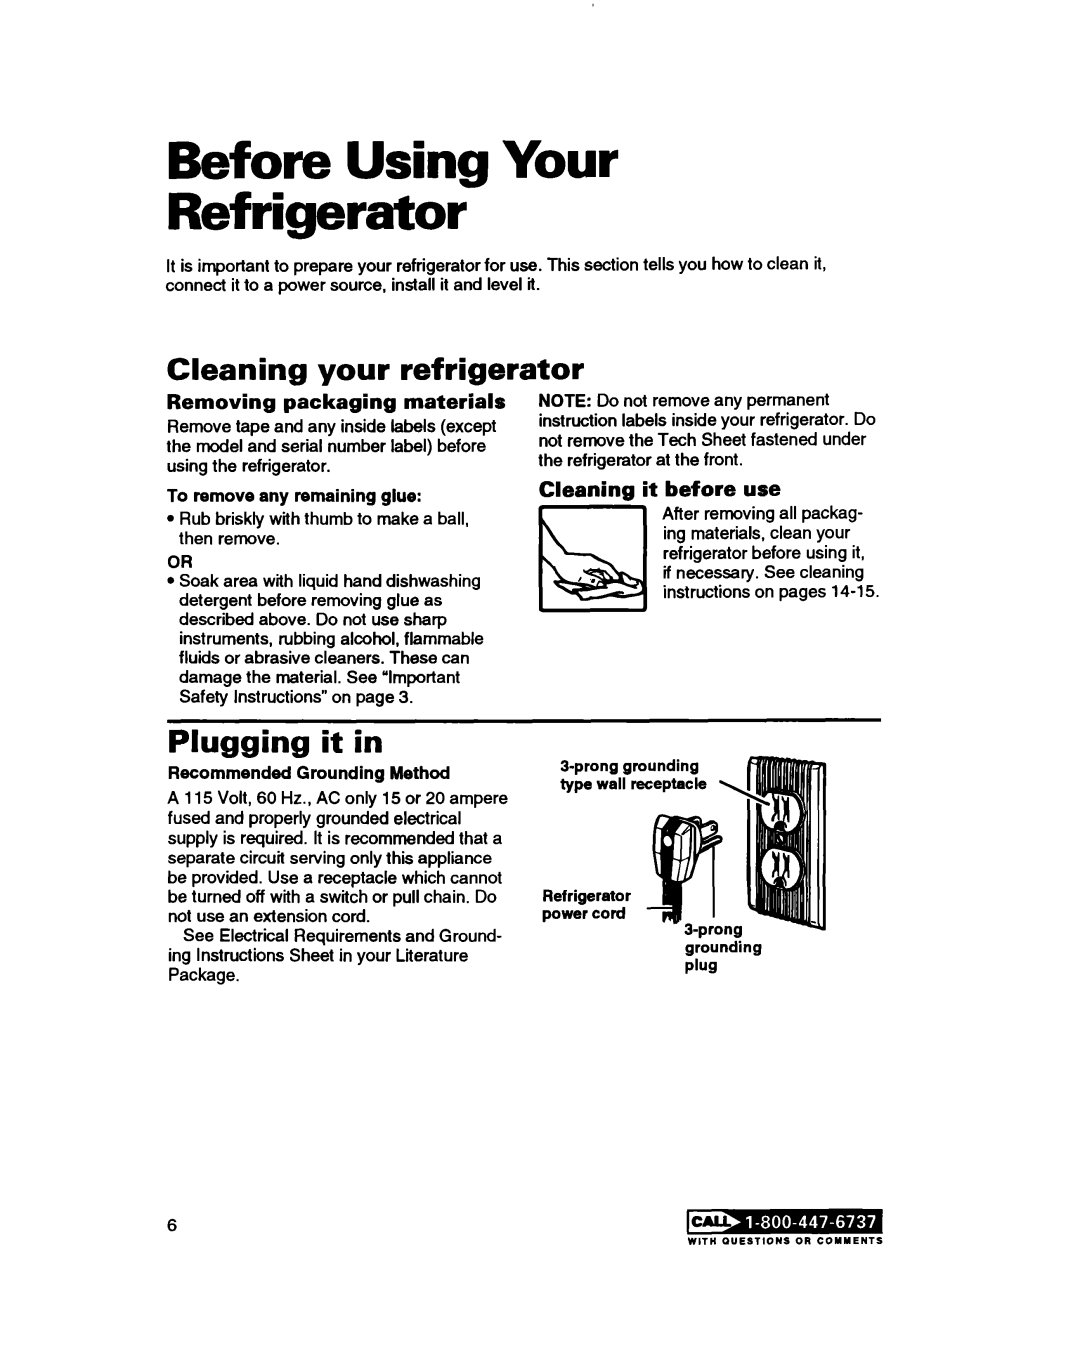 Whirlpool RT14ZK Before Using Your Refrigerator, Cleaning your refrigerator, Plugging it in, Removing packaging materials 